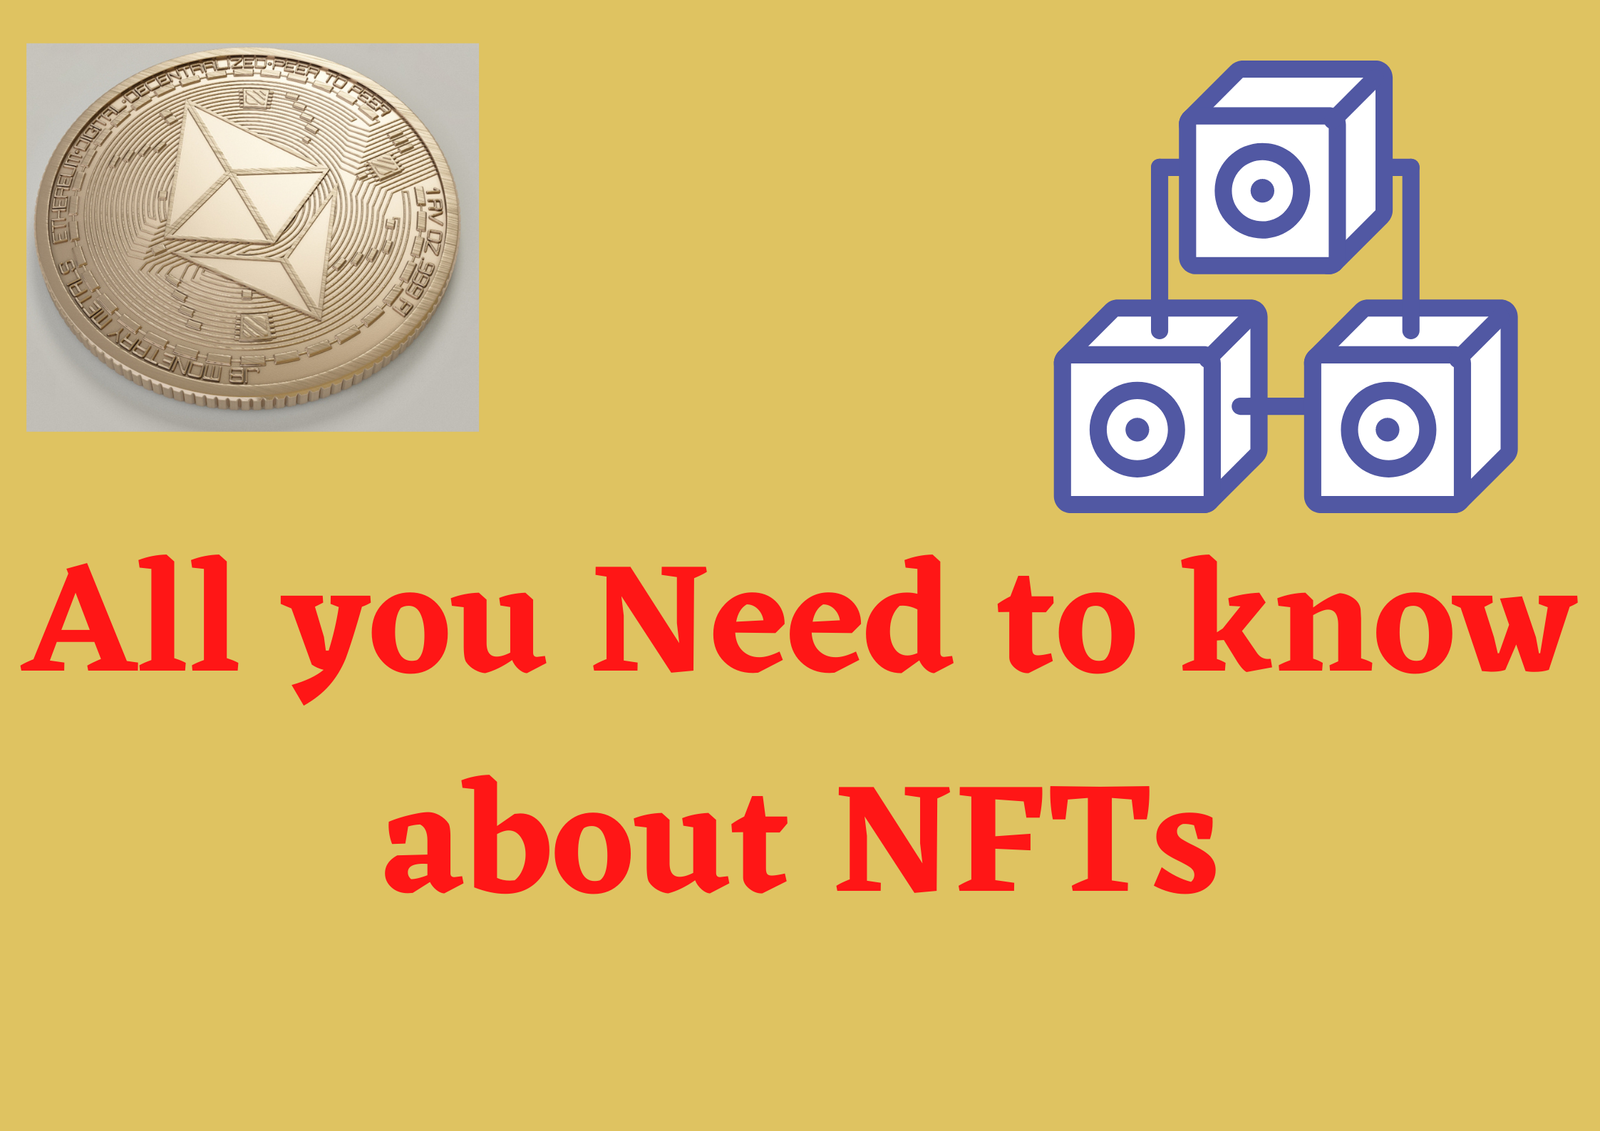 What are NFTs? All you Need to know about NFTs